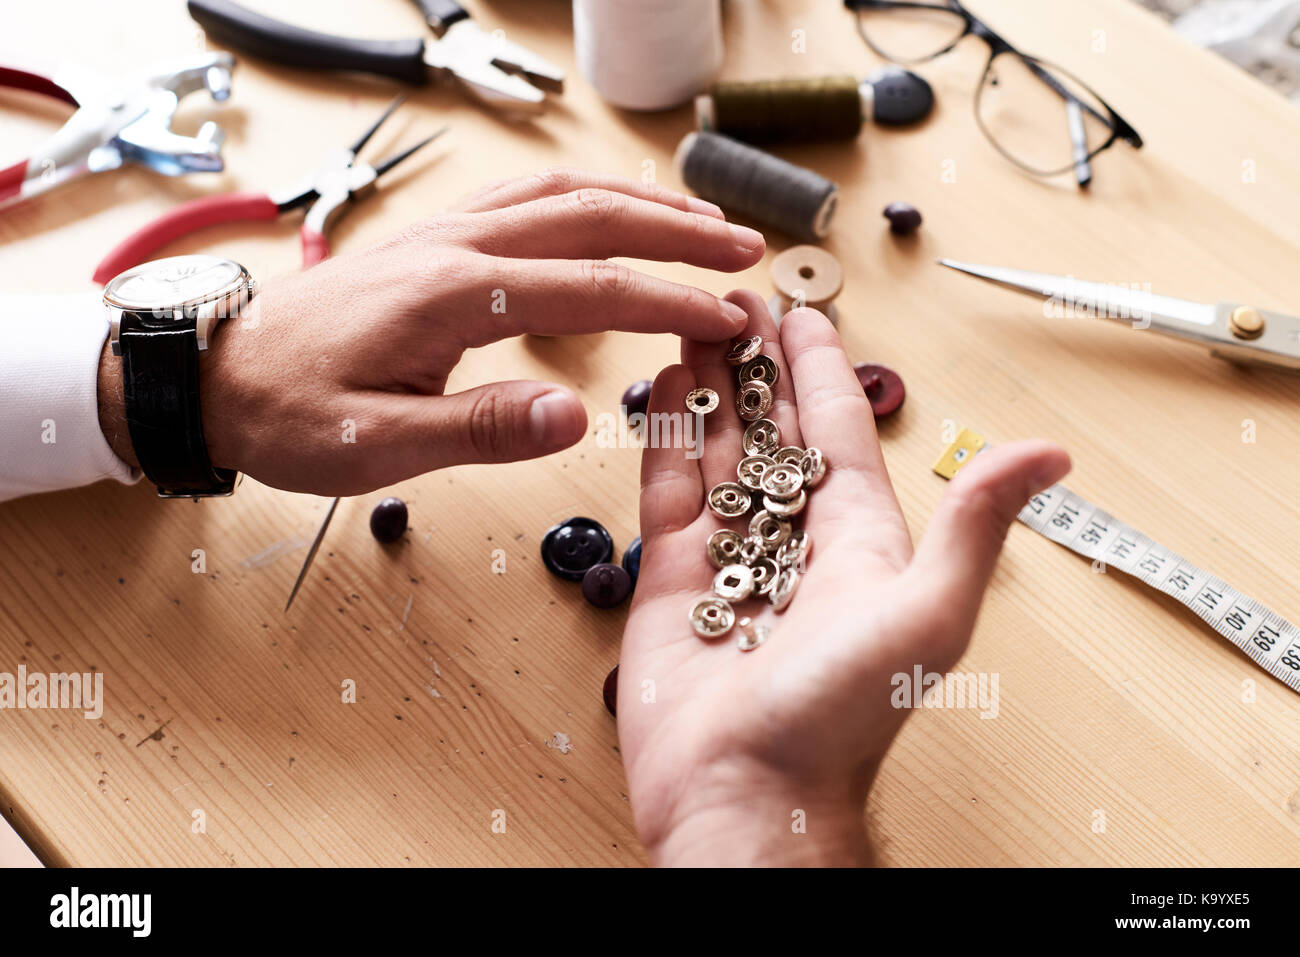 male hands with tailor measuring tape isolated 12570441 Stock